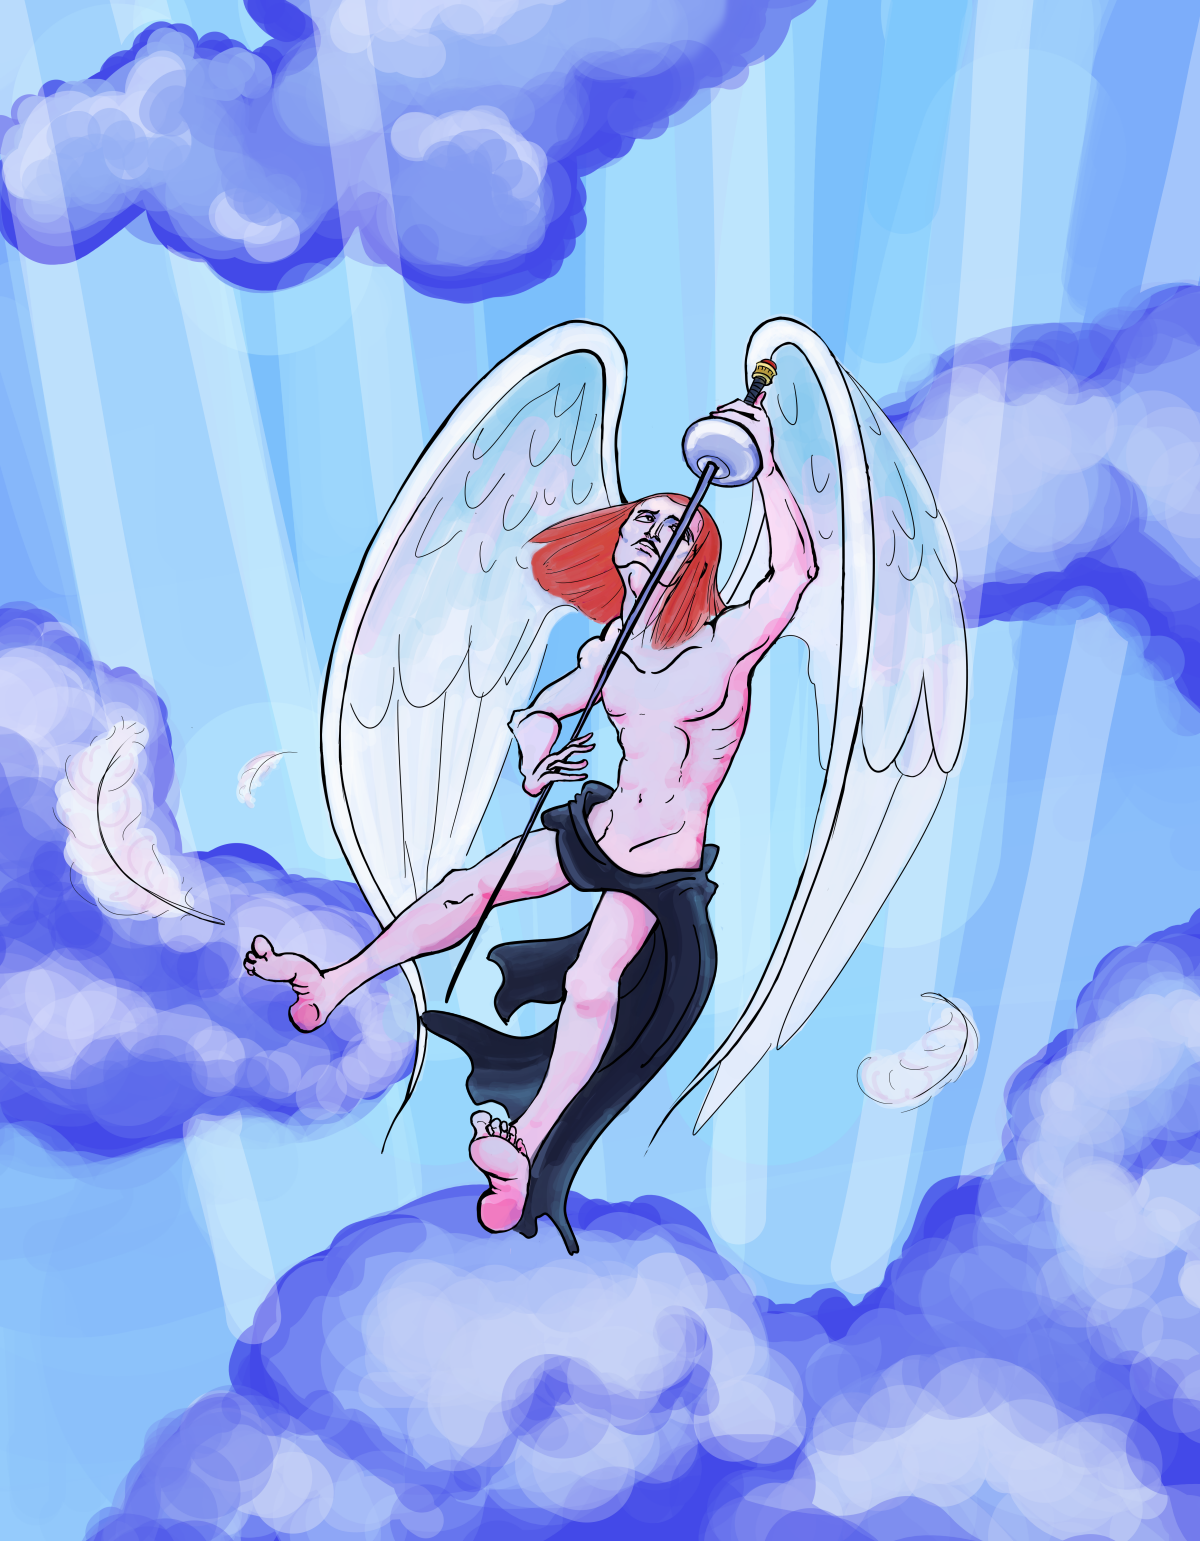 A winged man wearing a black sash and carrying an epee with a jeweled pommel, floating in a blue sky heaven